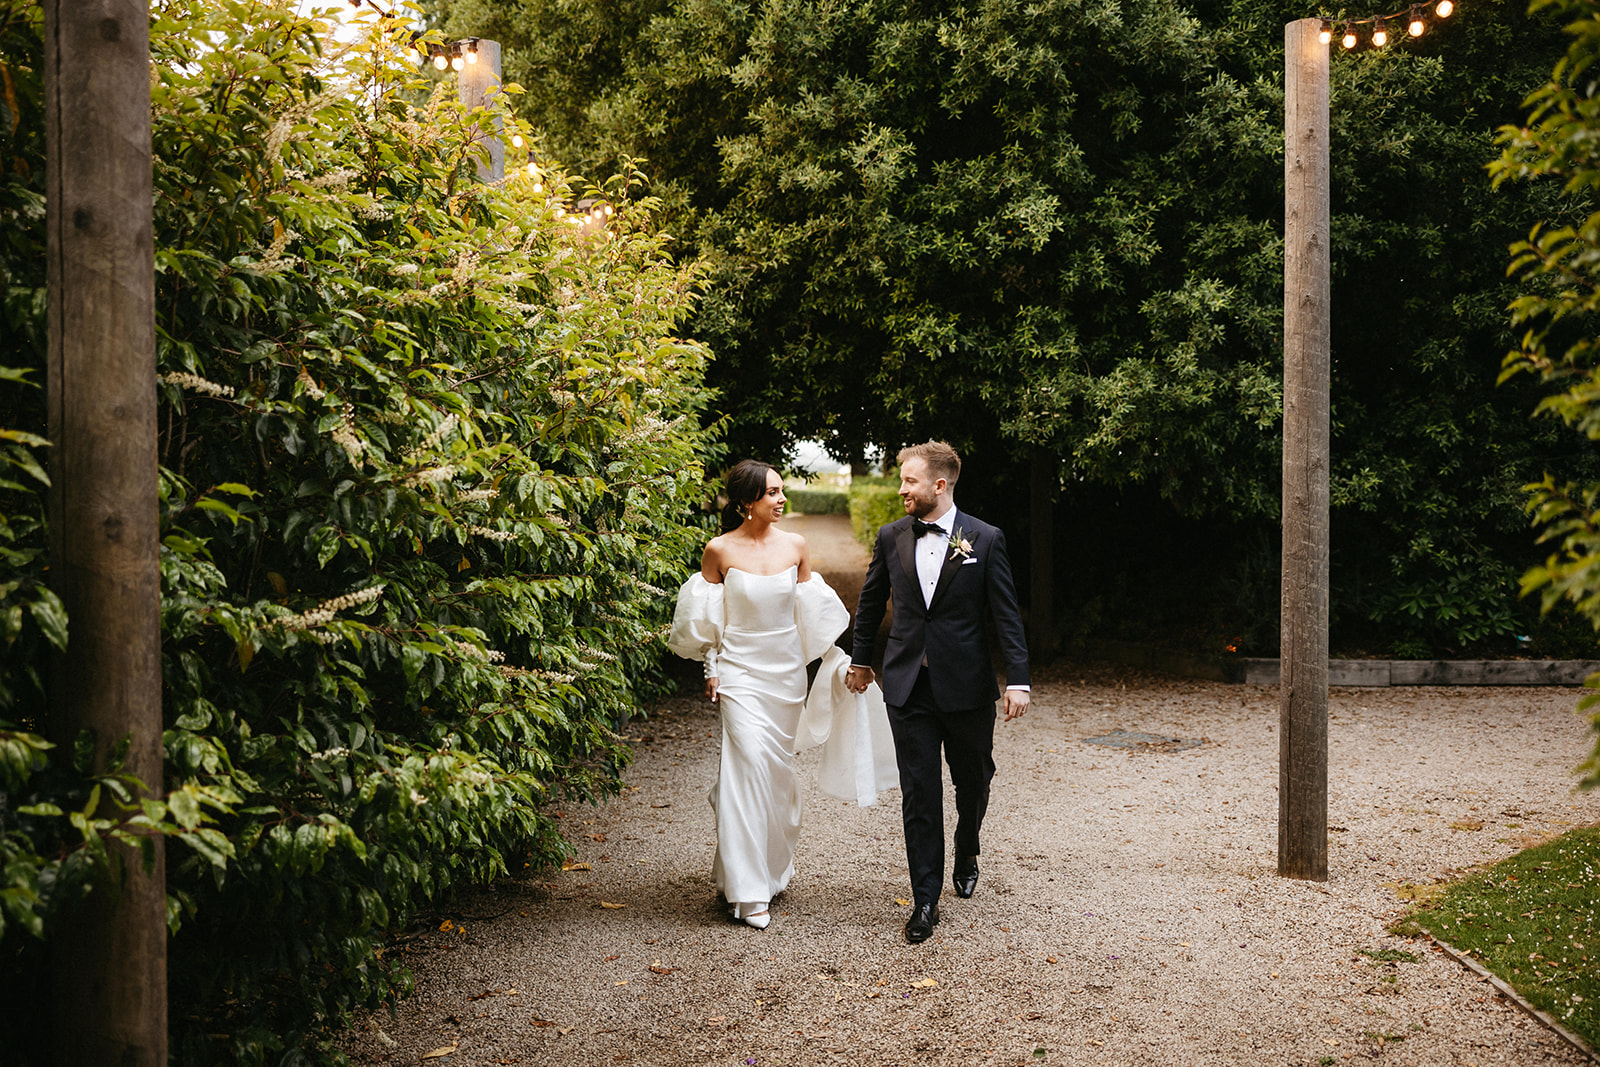 Bride and Groom, hand-in-hand, walking through the grounds of Tinakilly House on their wedding day